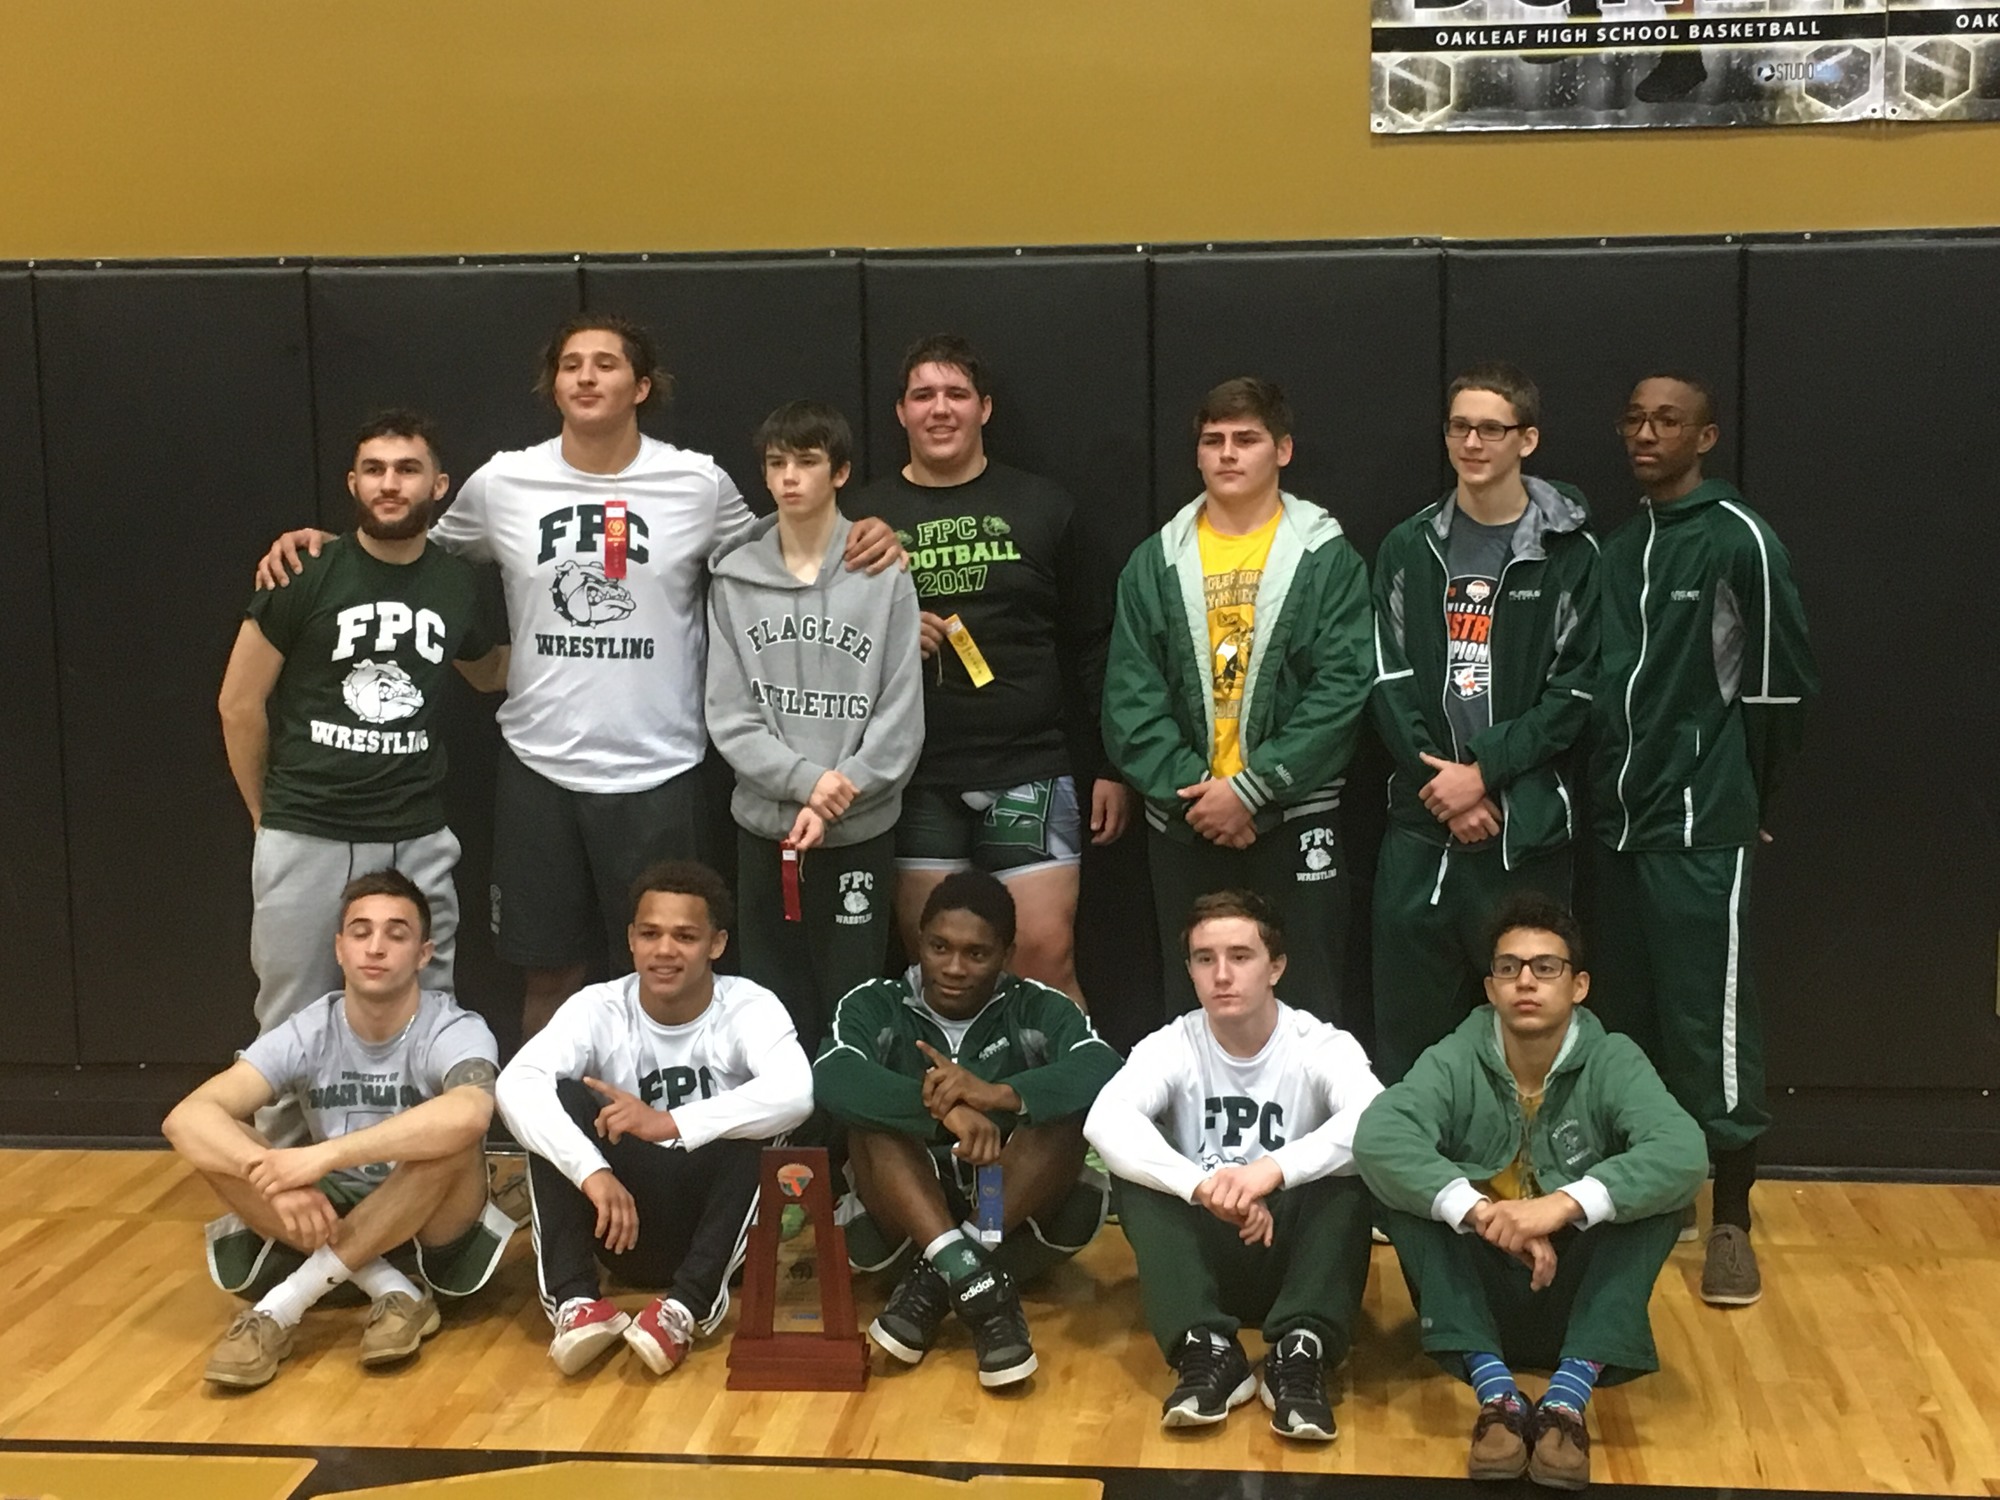 Flagler Palm Coast places second at the district tournament, falling short to Fleming Island. Photo courtesy of Andy Dance